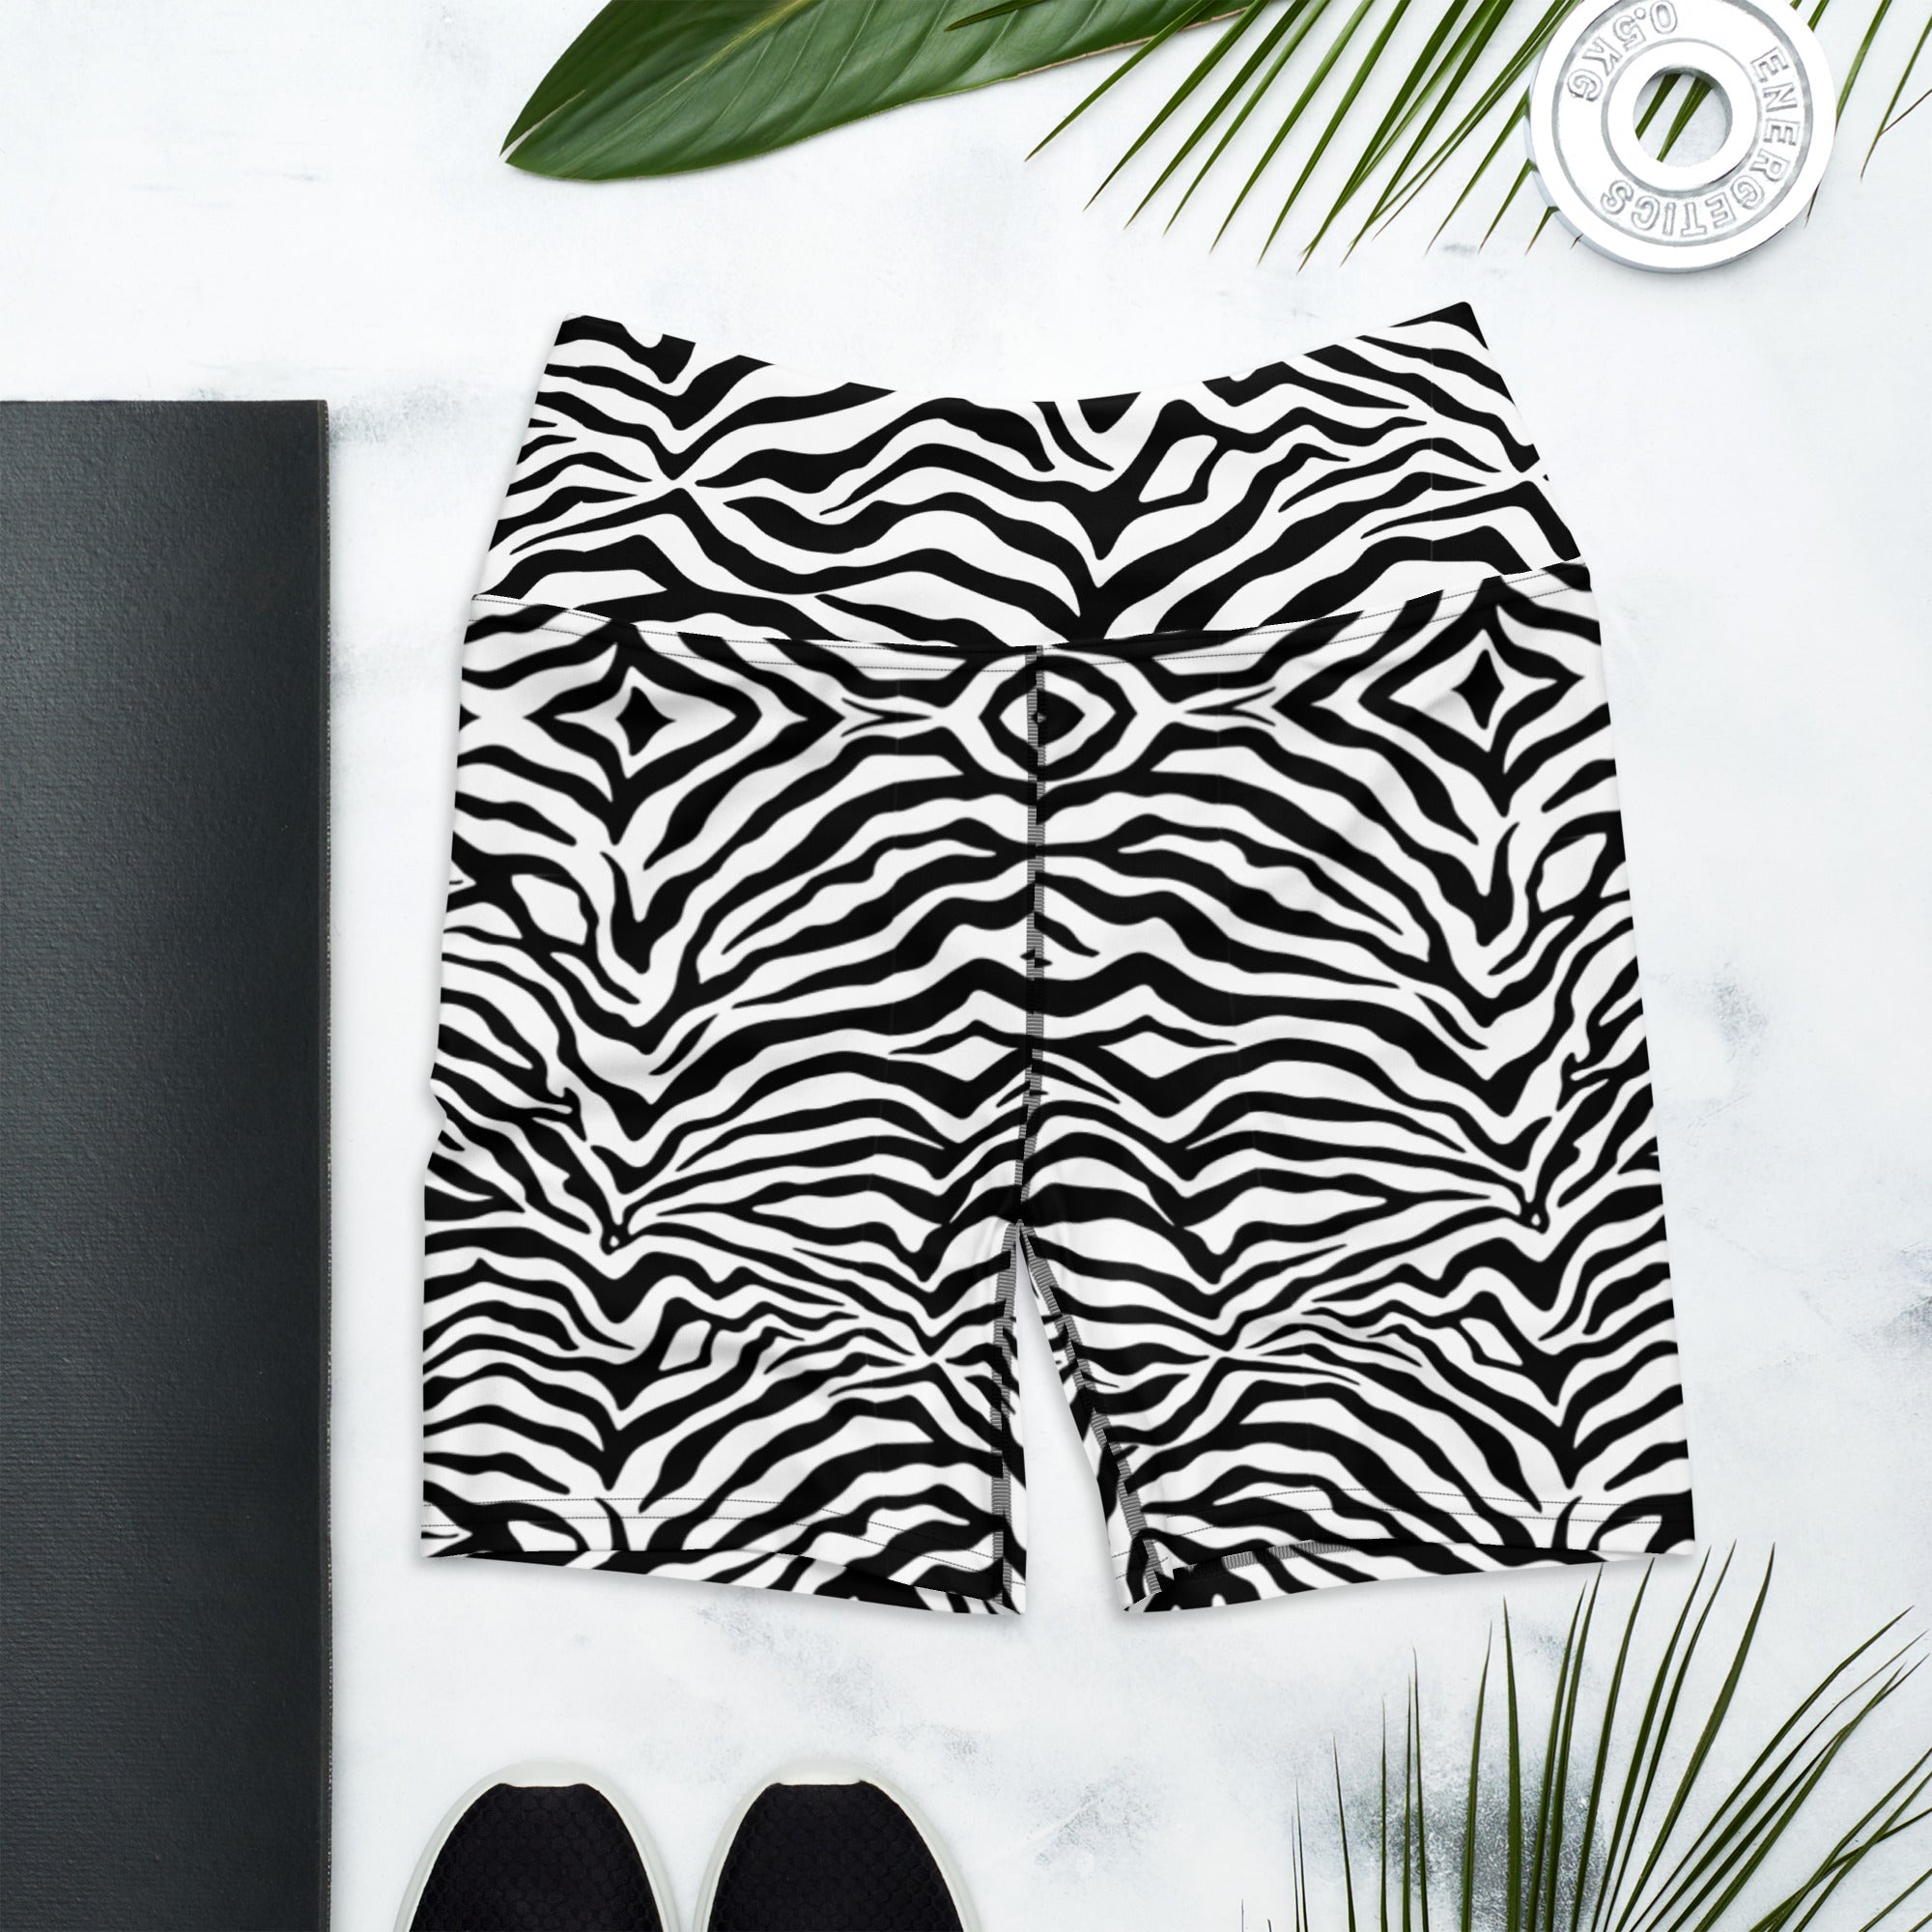 Zebra Yoga Shorts - Revive Wear     Zebra Yoga Shorts provide soft, body-flattering support and comfort during intense workouts. The smooth, handmade shorts keep everything in place as you flow through poses.